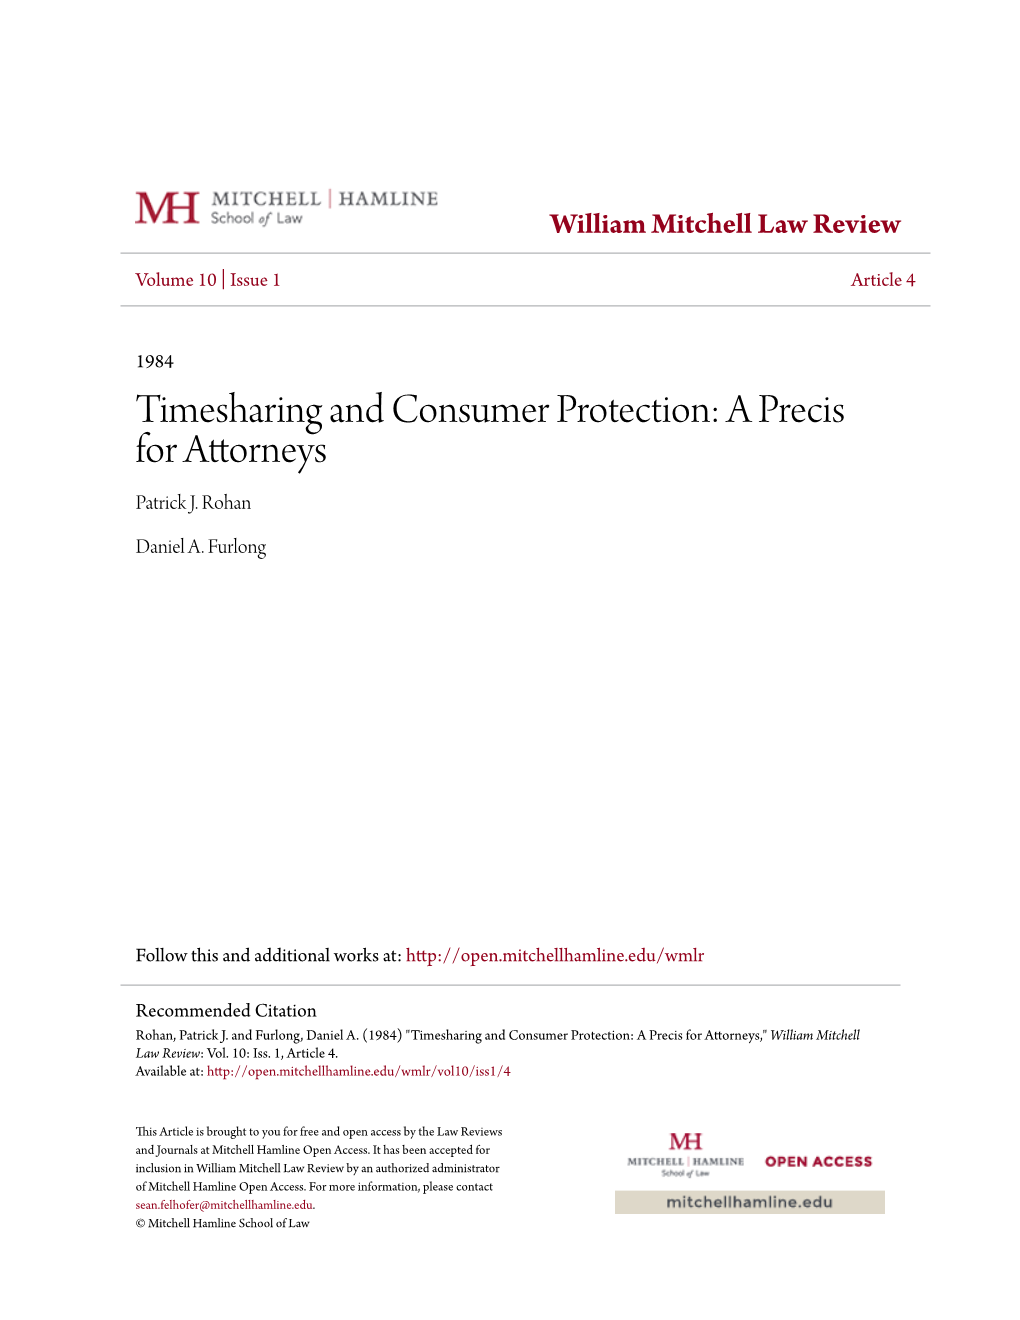 Timesharing and Consumer Protection: a Precis for Attorneys Patrick J